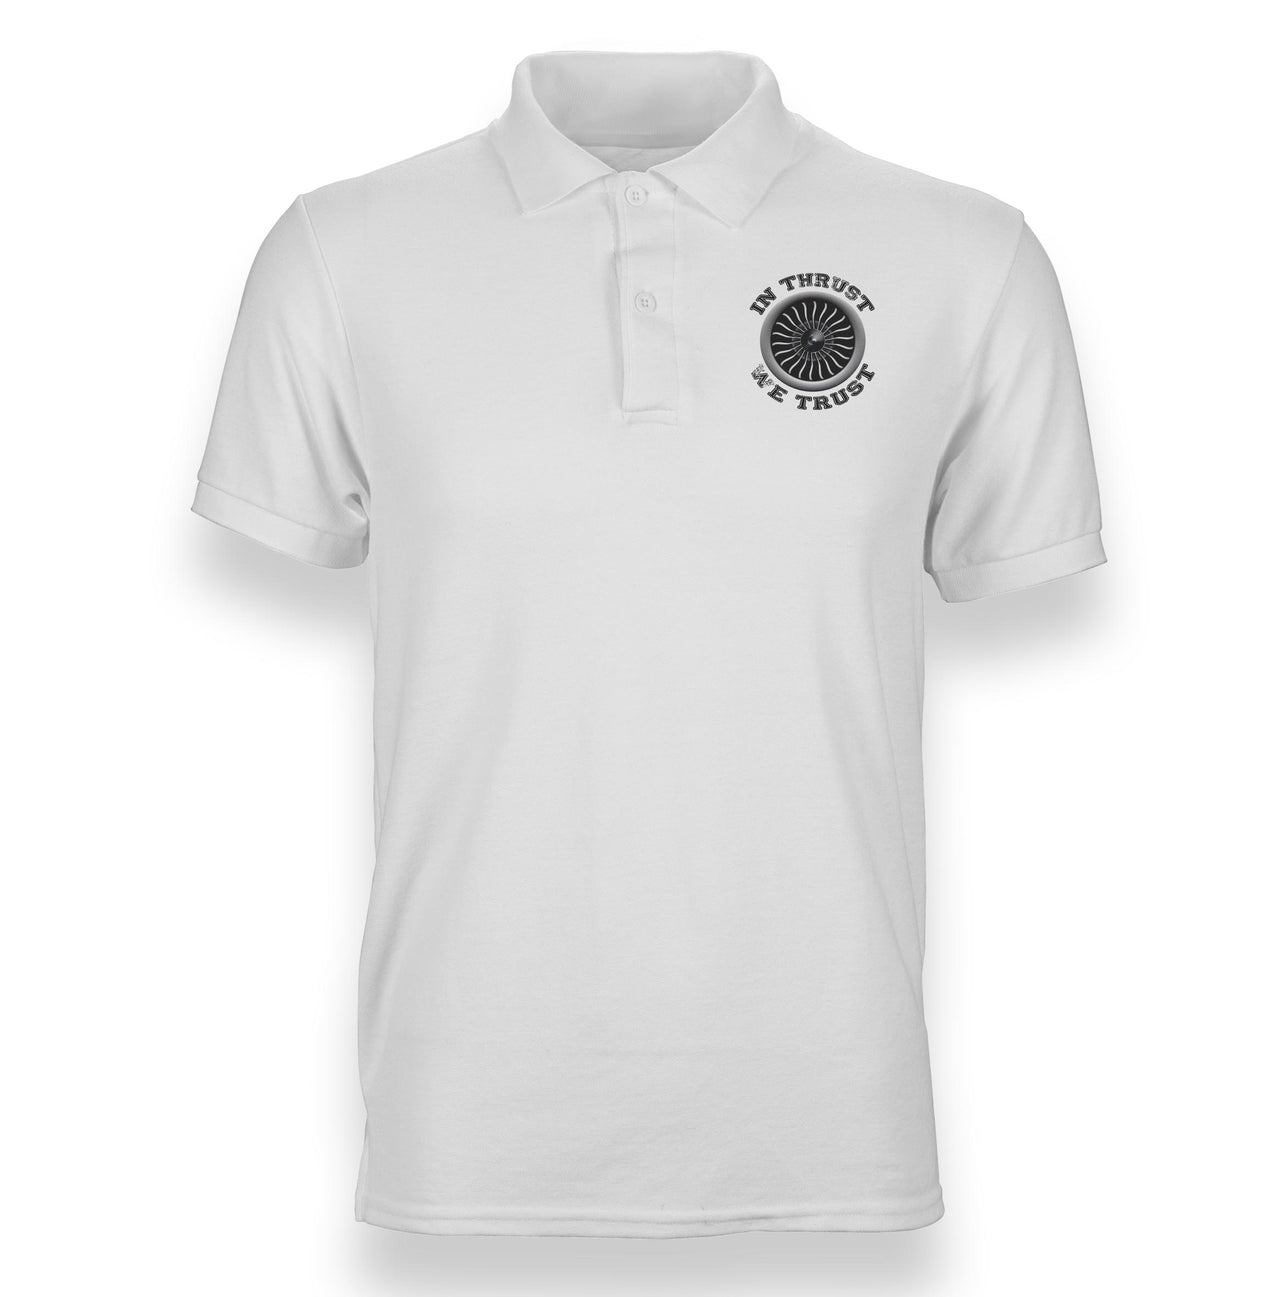 In Thrust We Trust (Vol 2) Designed Polo T-Shirts